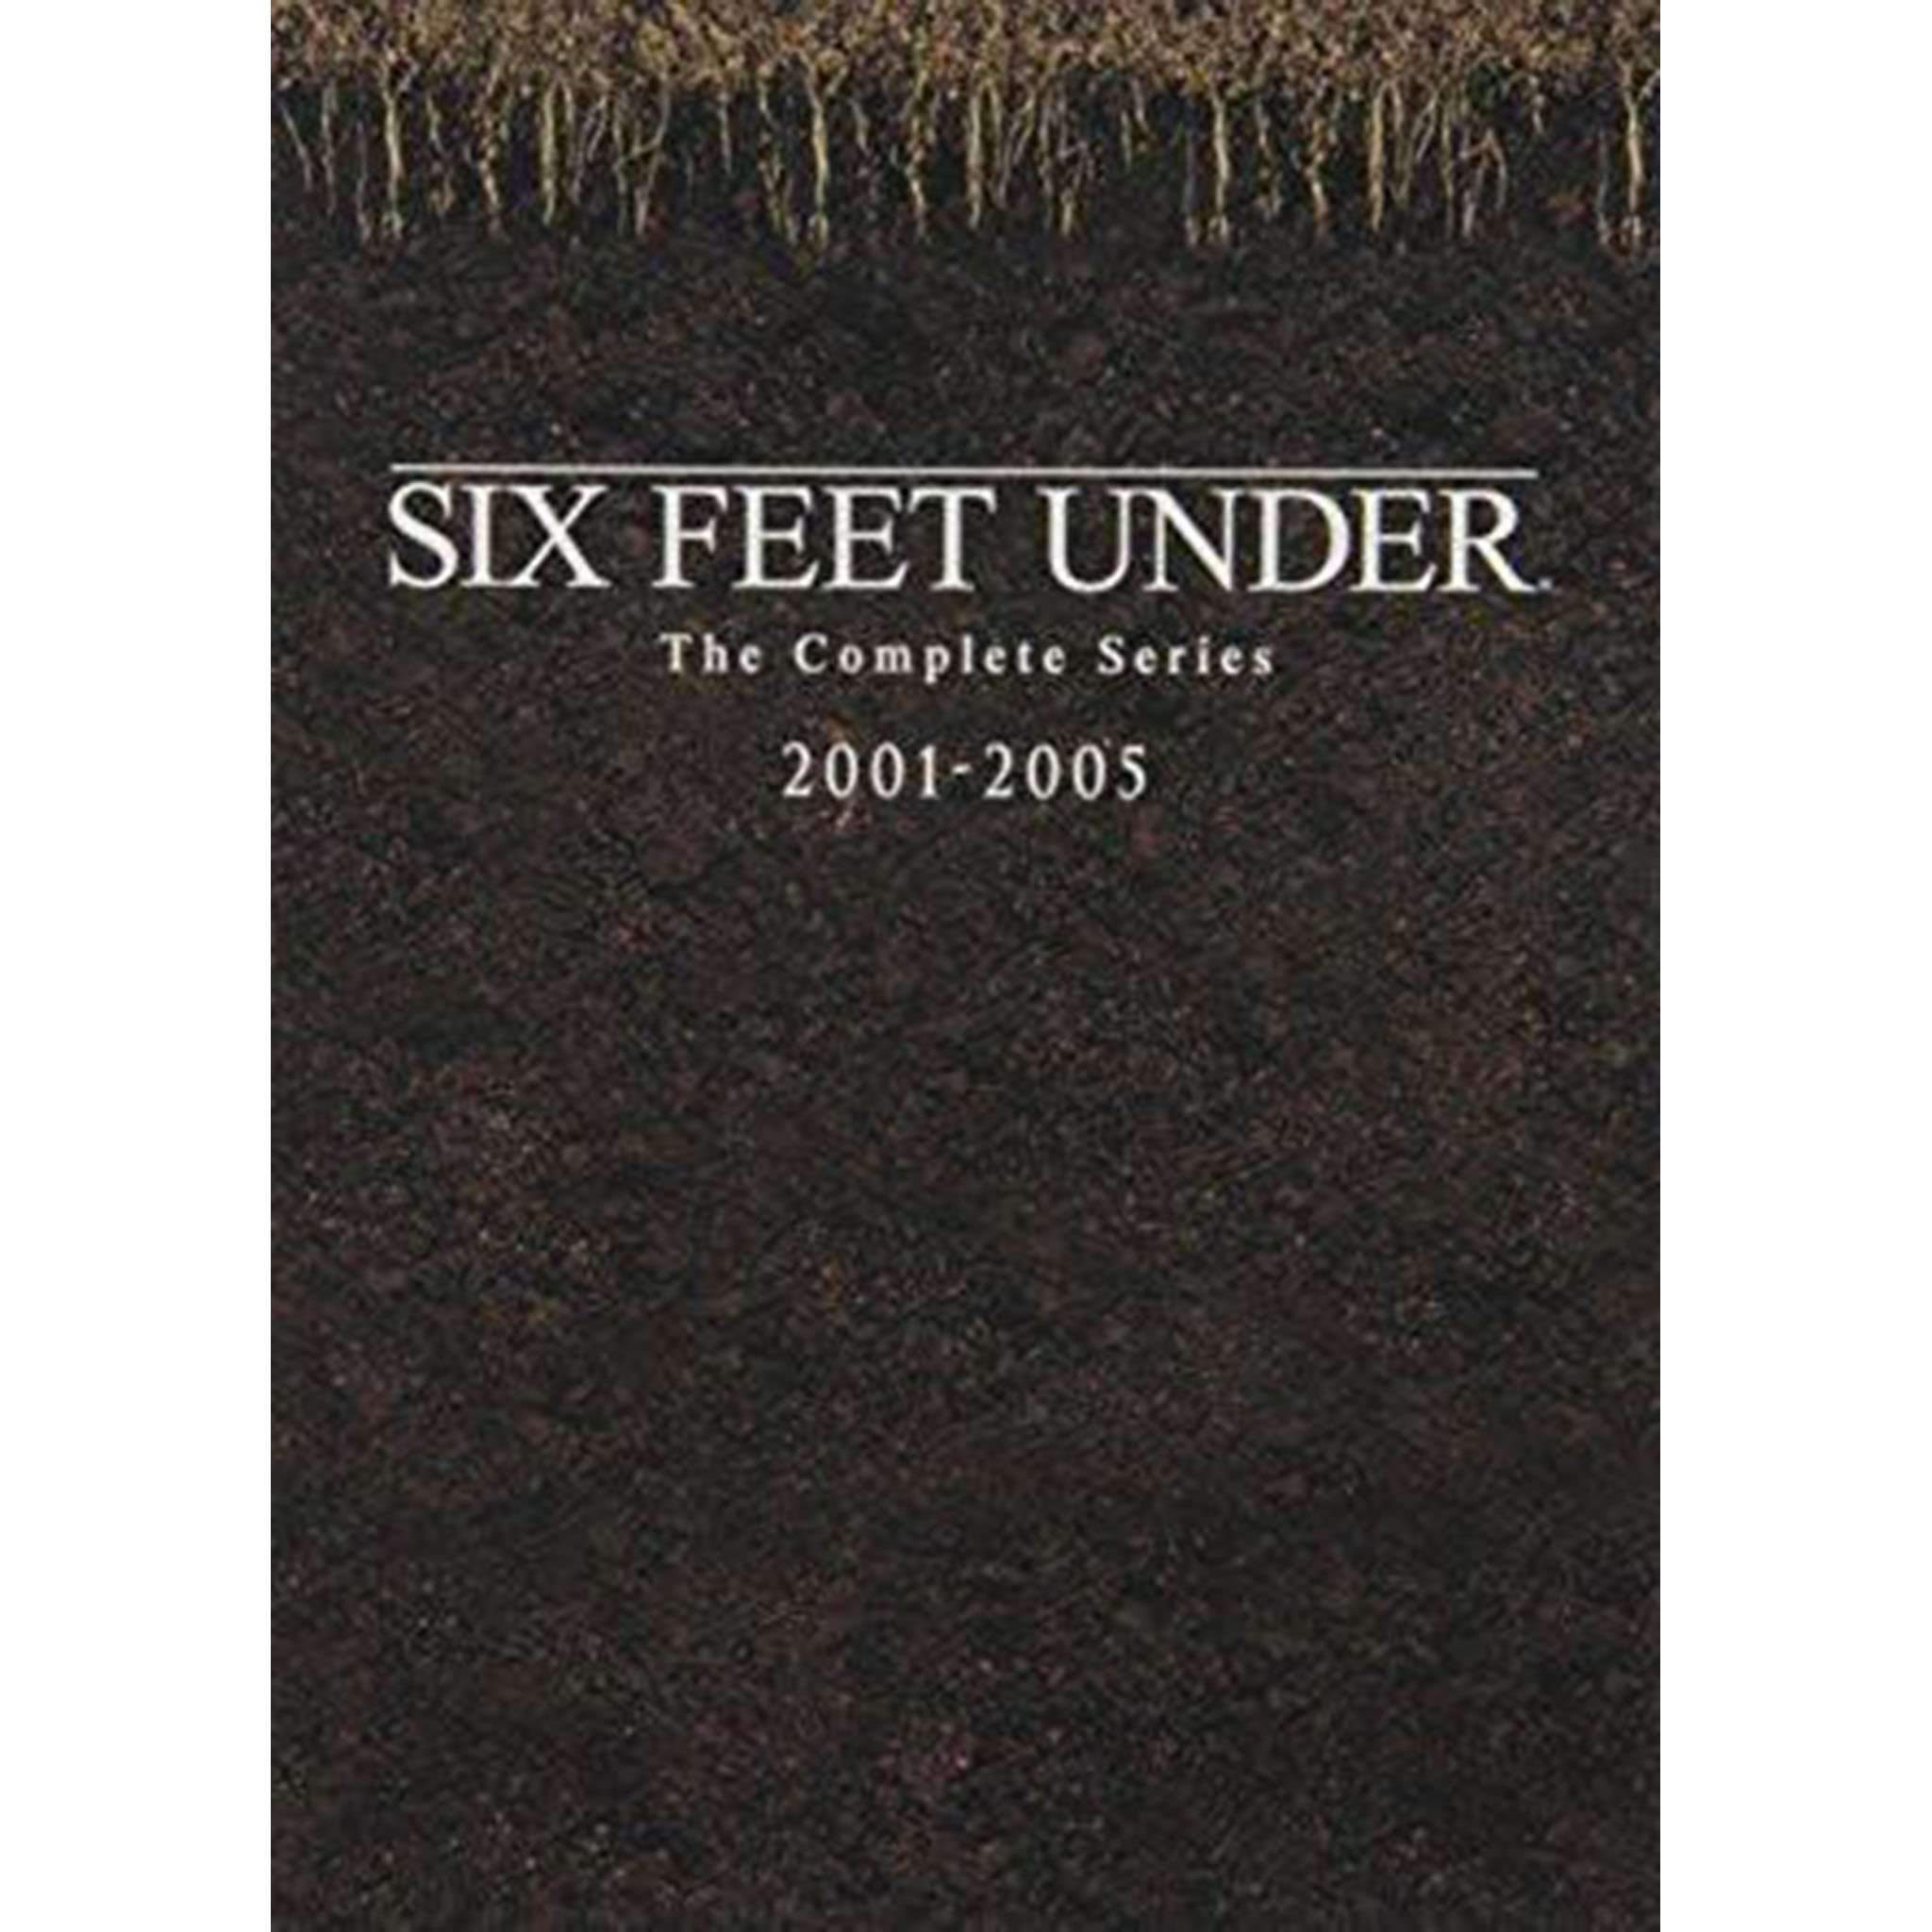 Six Feet Under DVD Complete Series Box Set HBO DVDs & Blu-ray Discs > DVDs > Box Sets